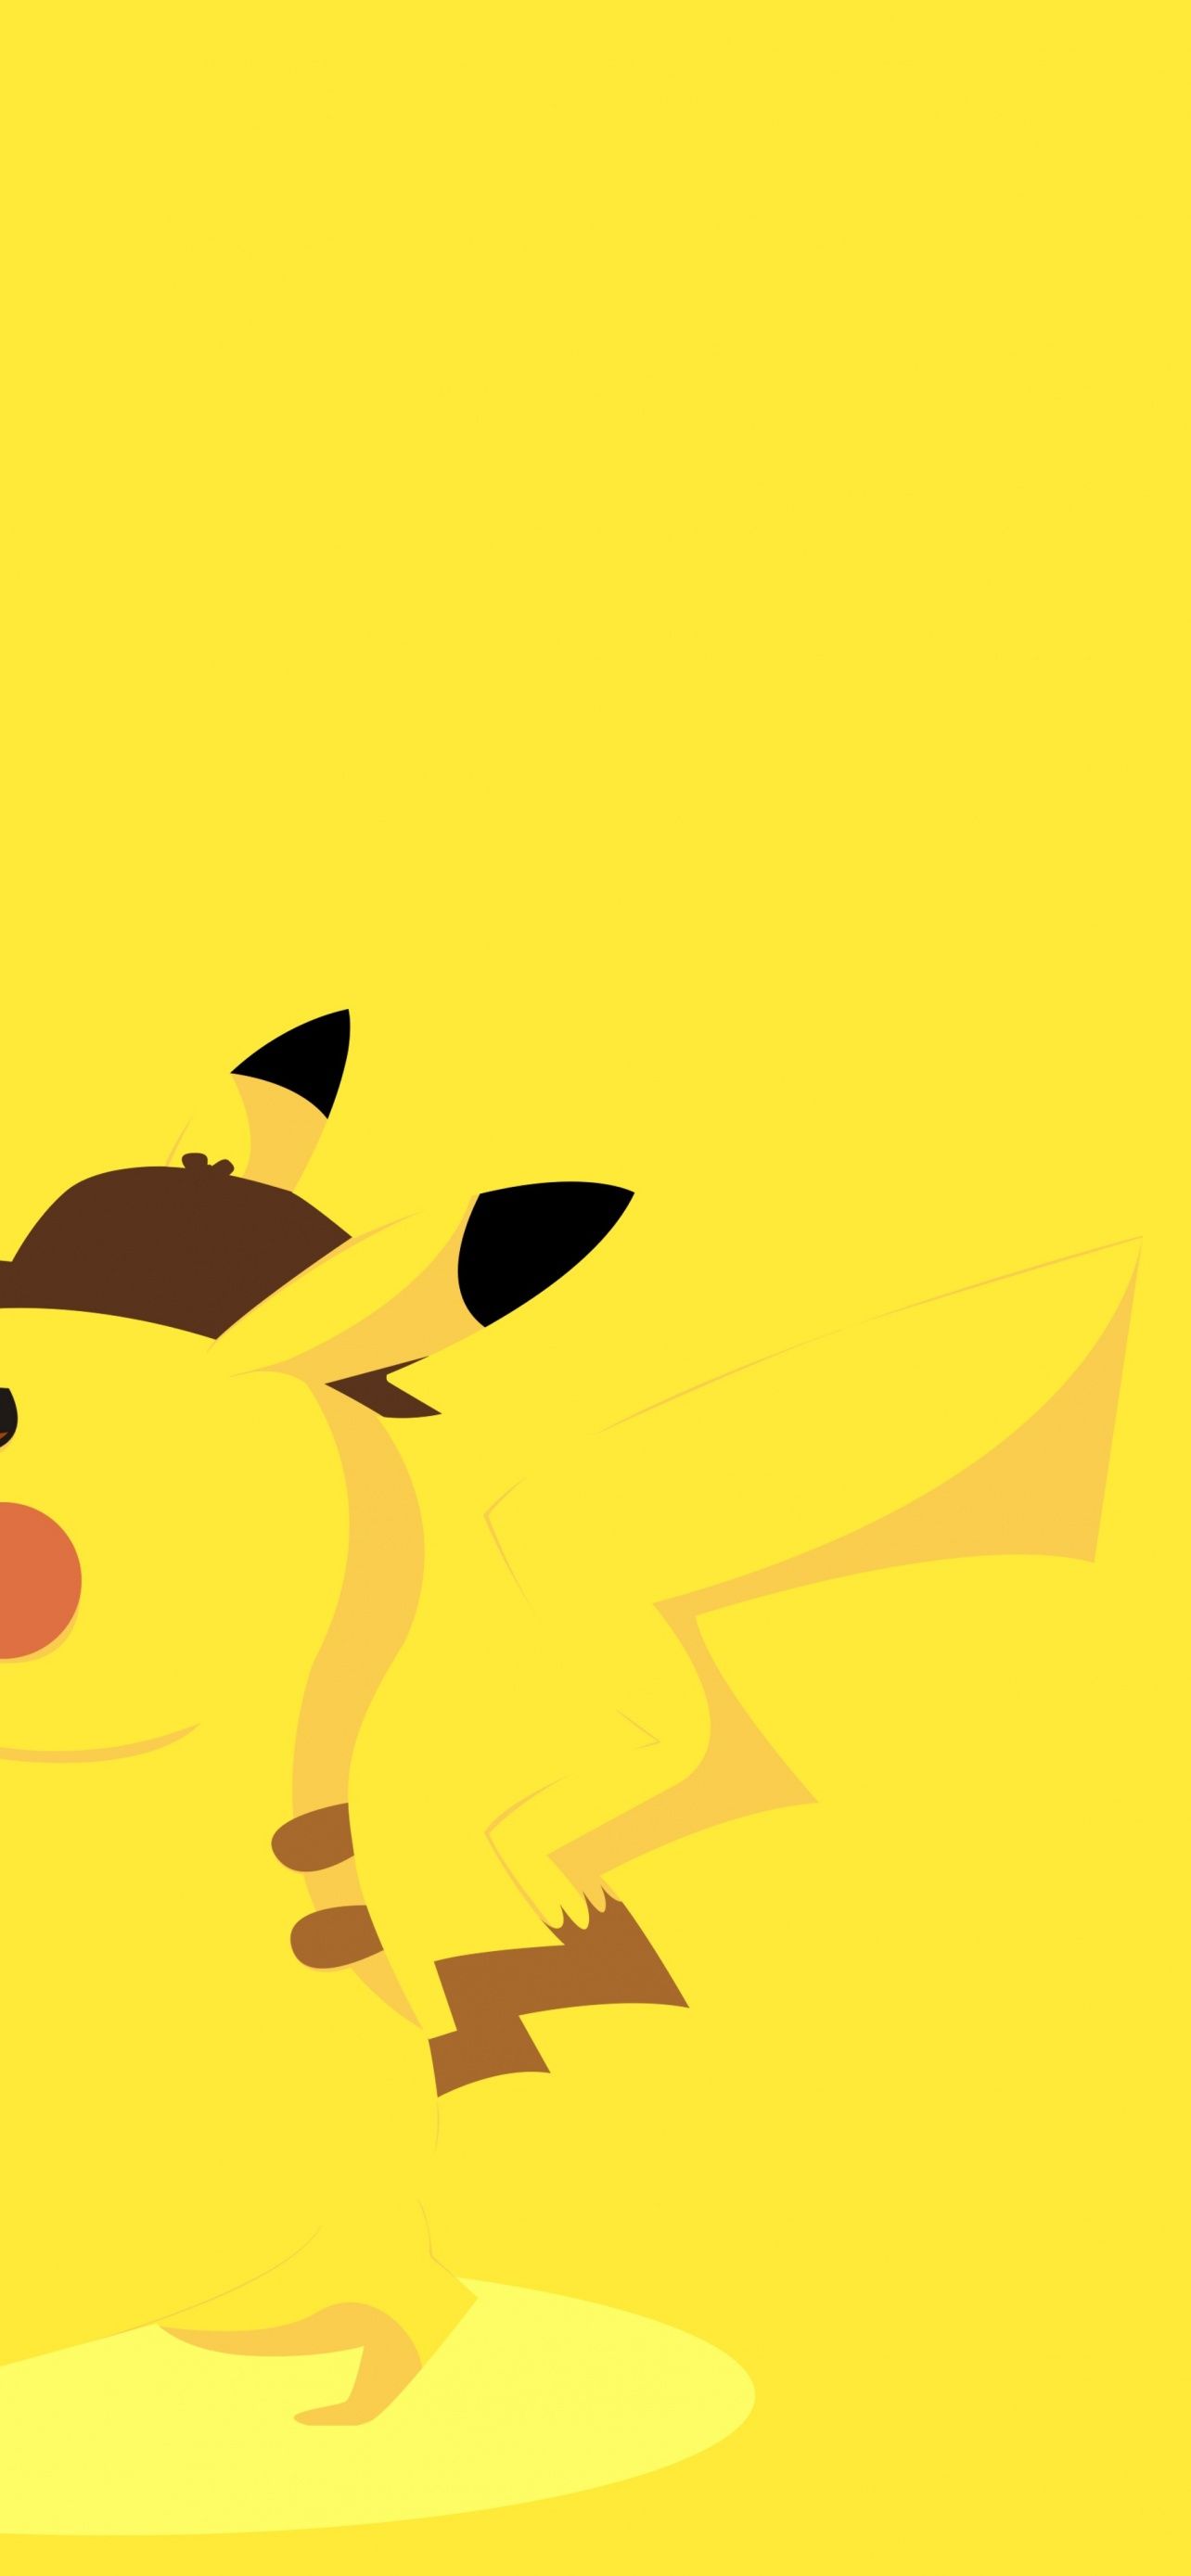 A yellow pikachu with black wings and tail - Pikachu